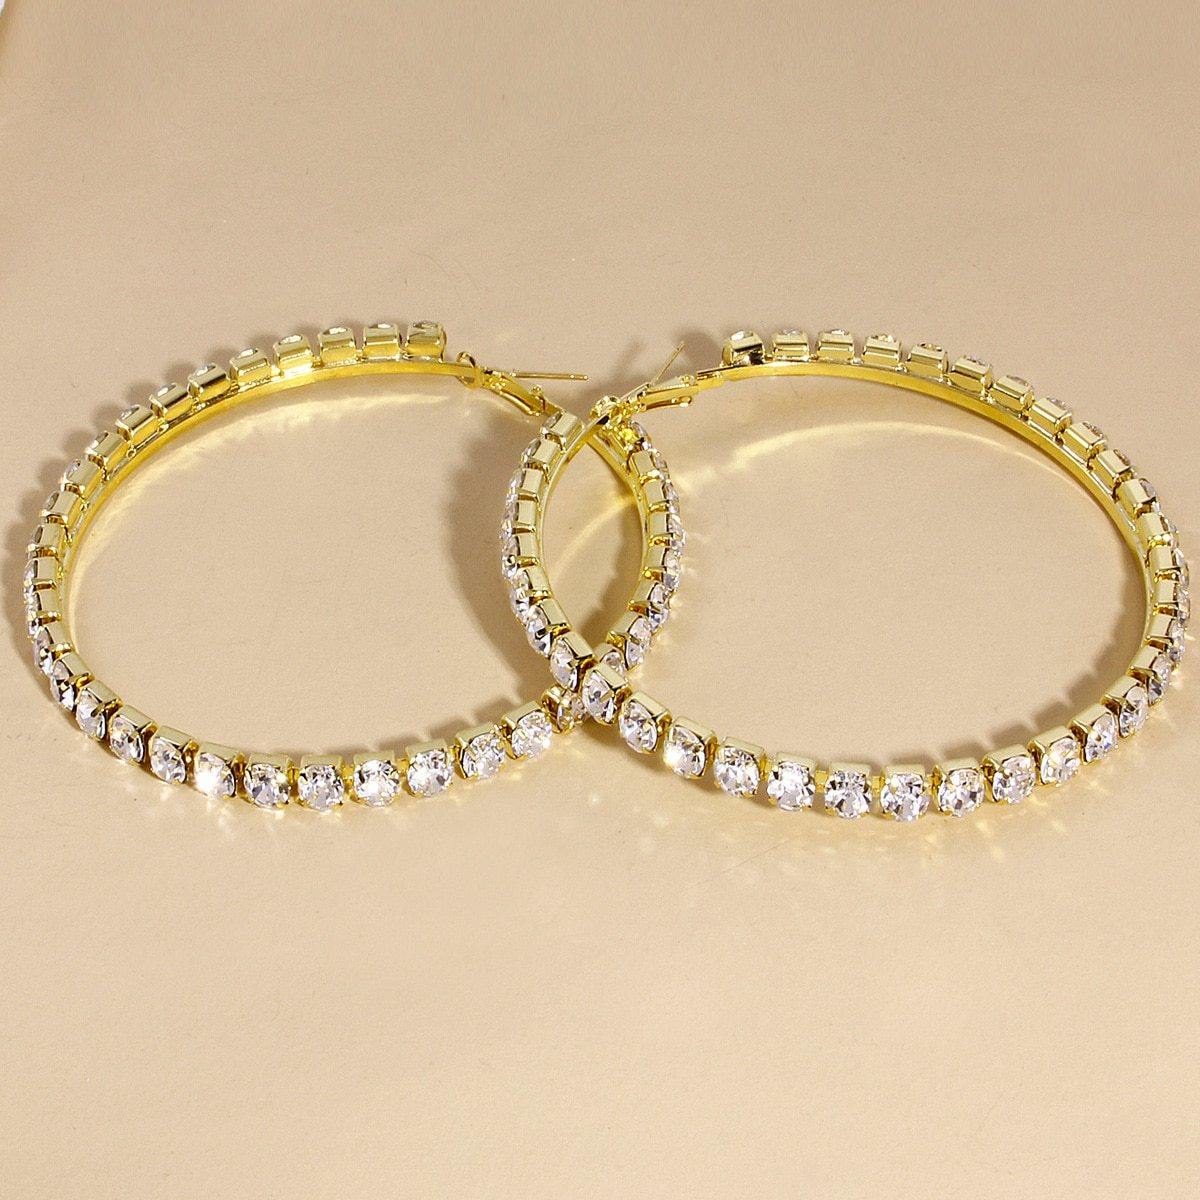 Large Round Hoop Earrings for Women - Vianchi Natural Glam